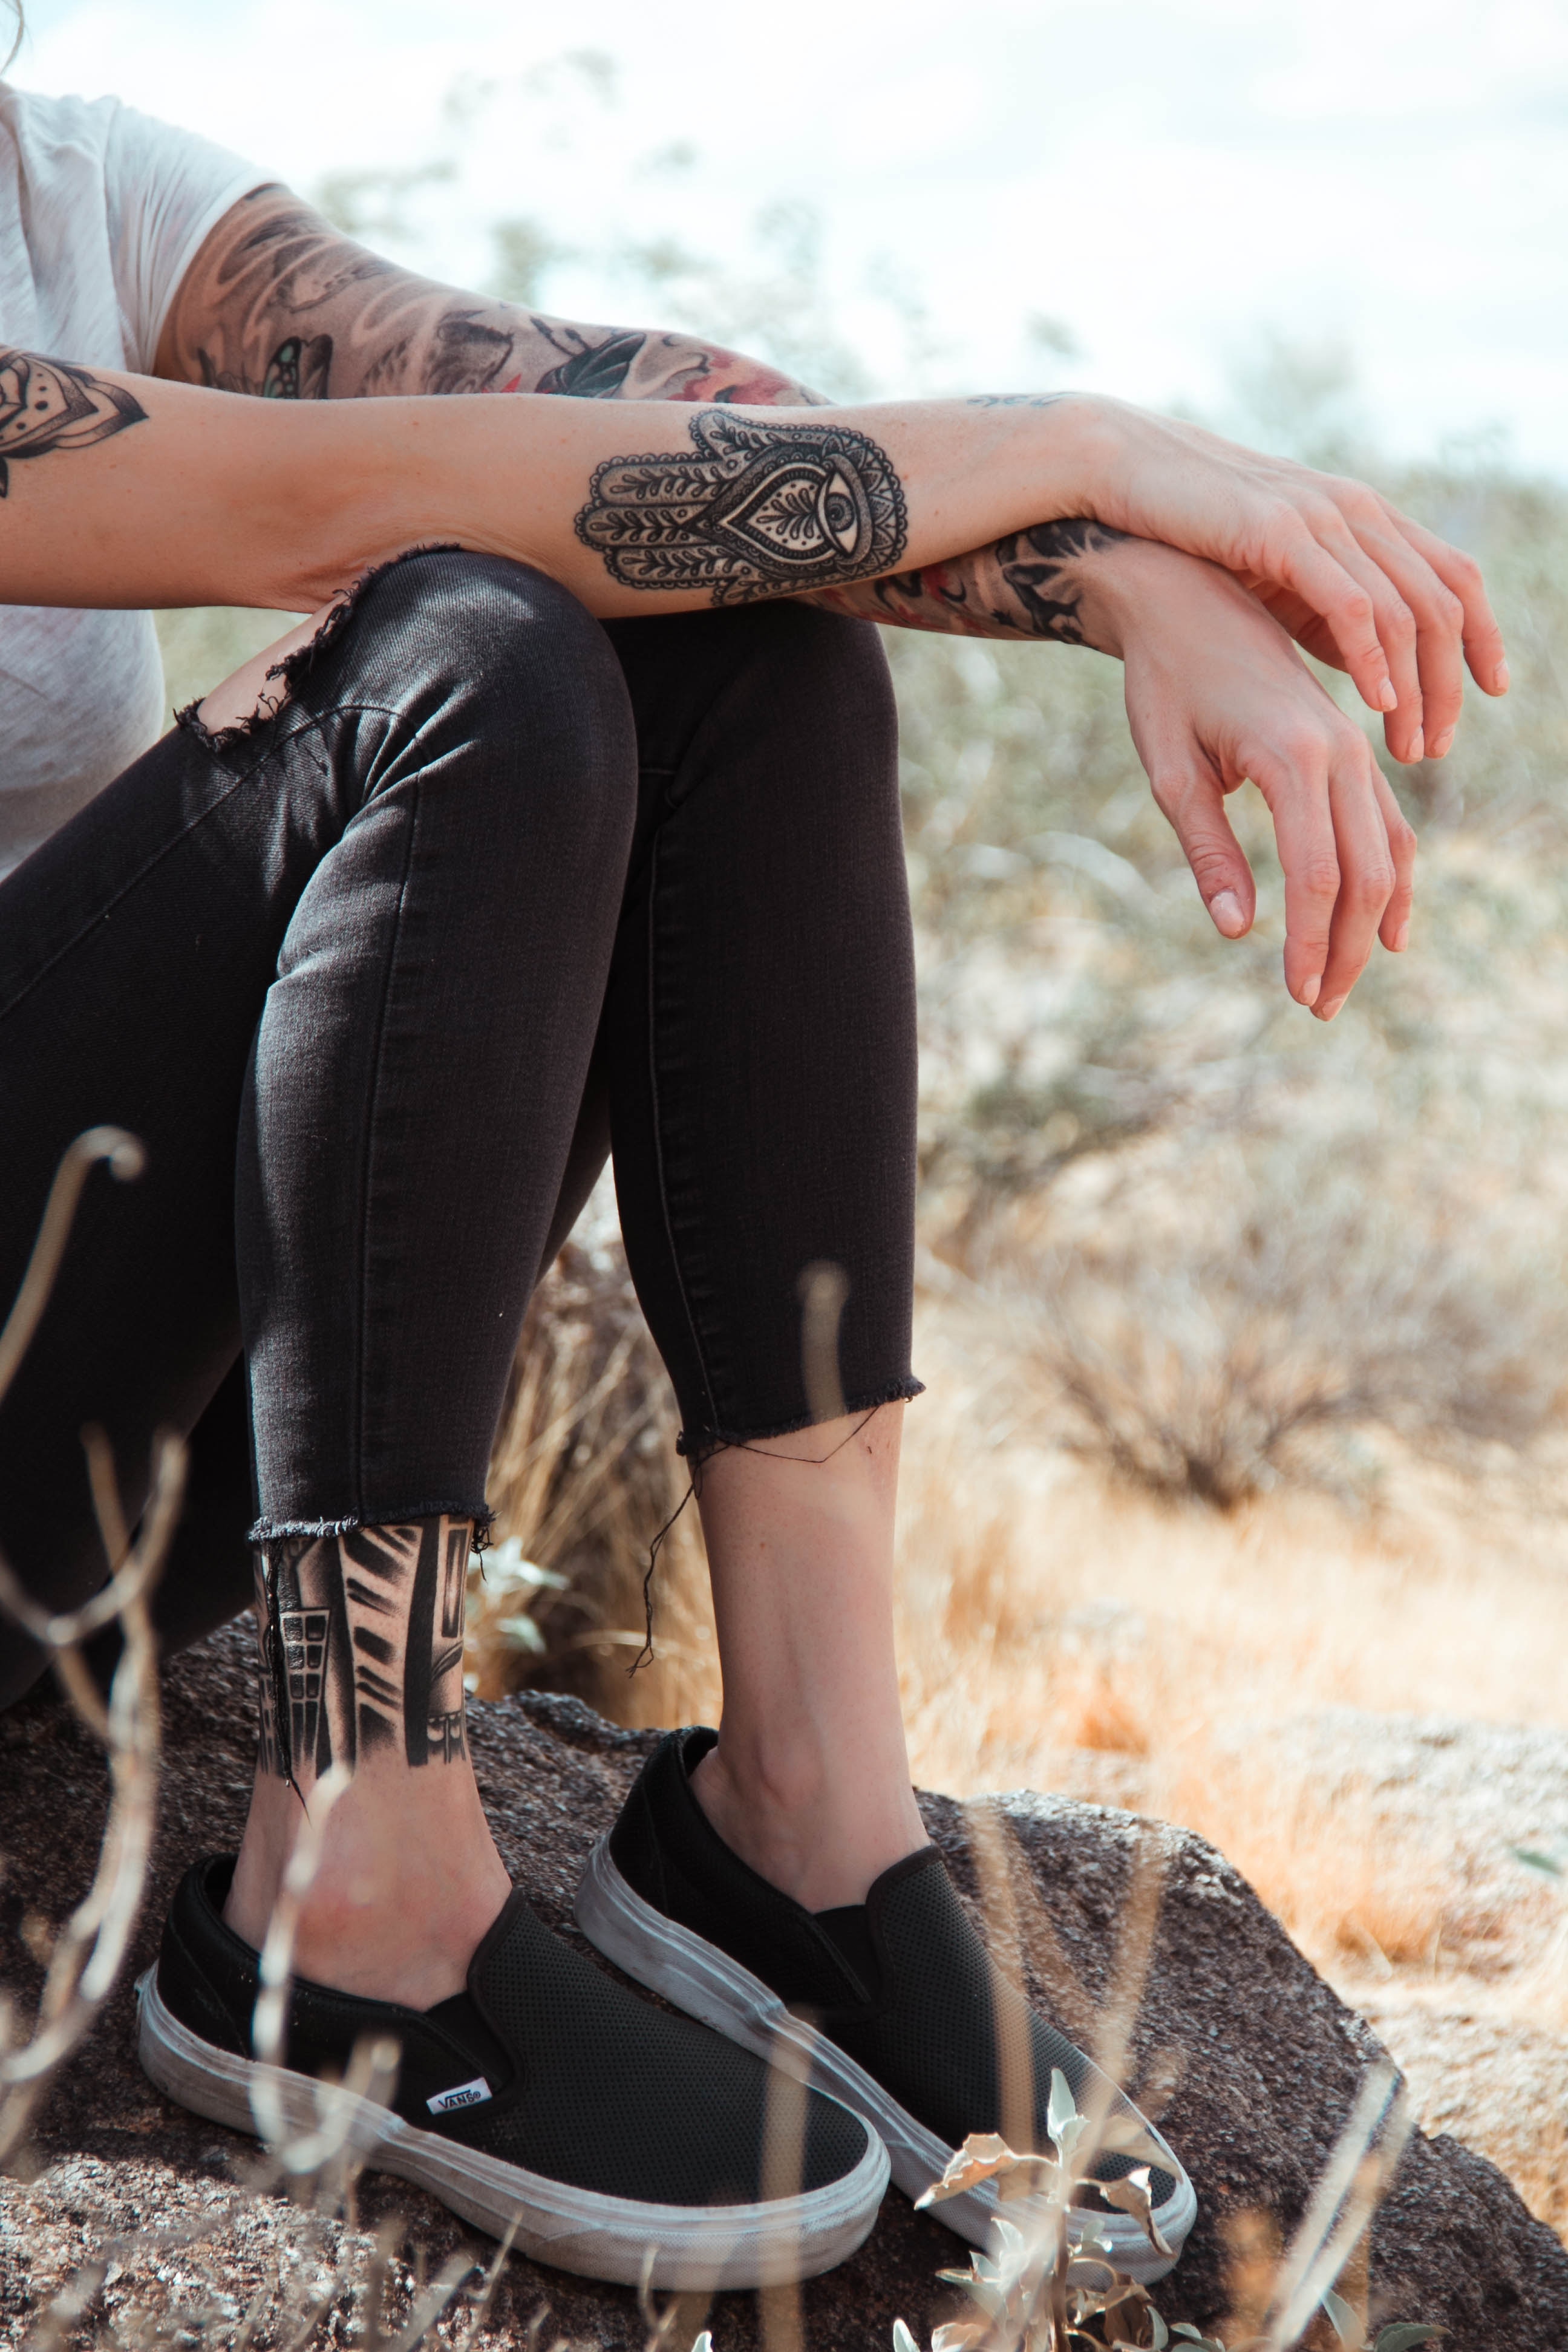 hands, tattoos, tattoo, miscellanea, miscellaneous, legs, style, clothing 4K